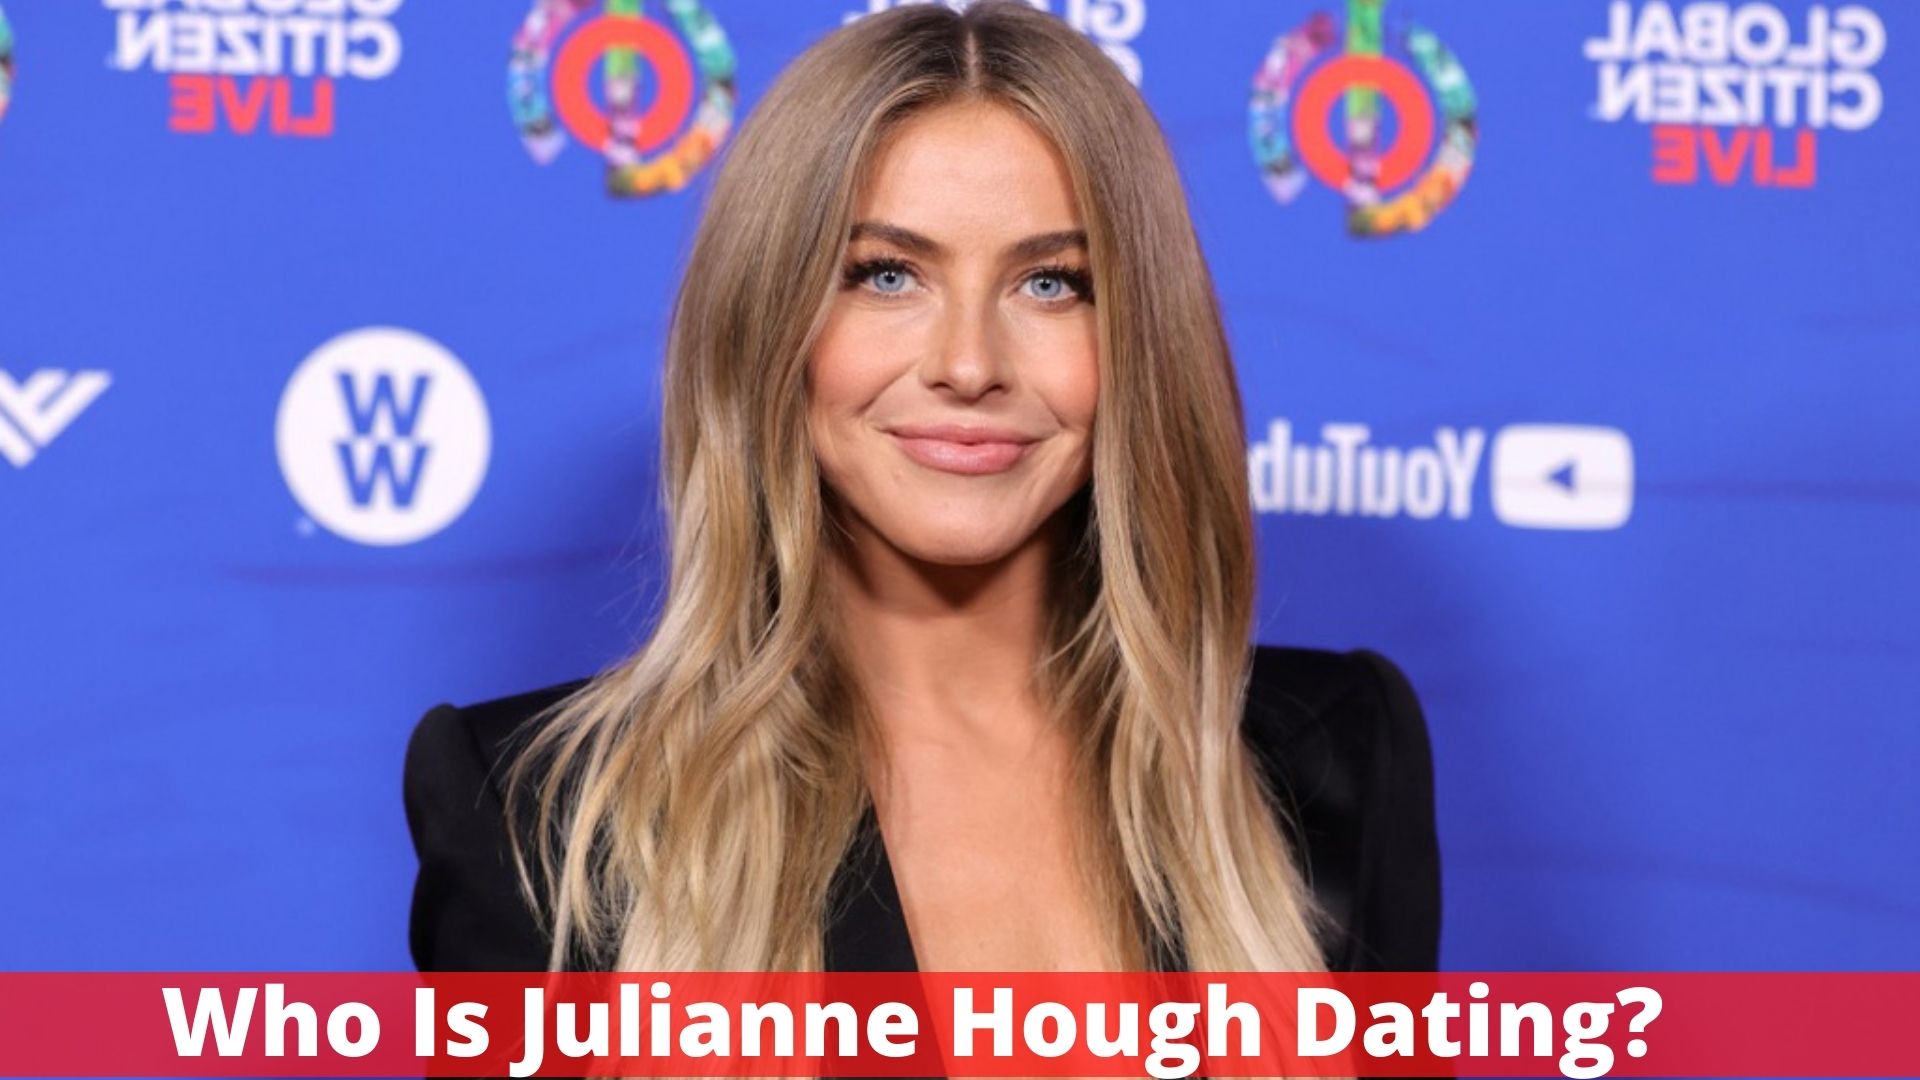 Who Is Julianne Hough Dating? Complete Relationship Timeline!